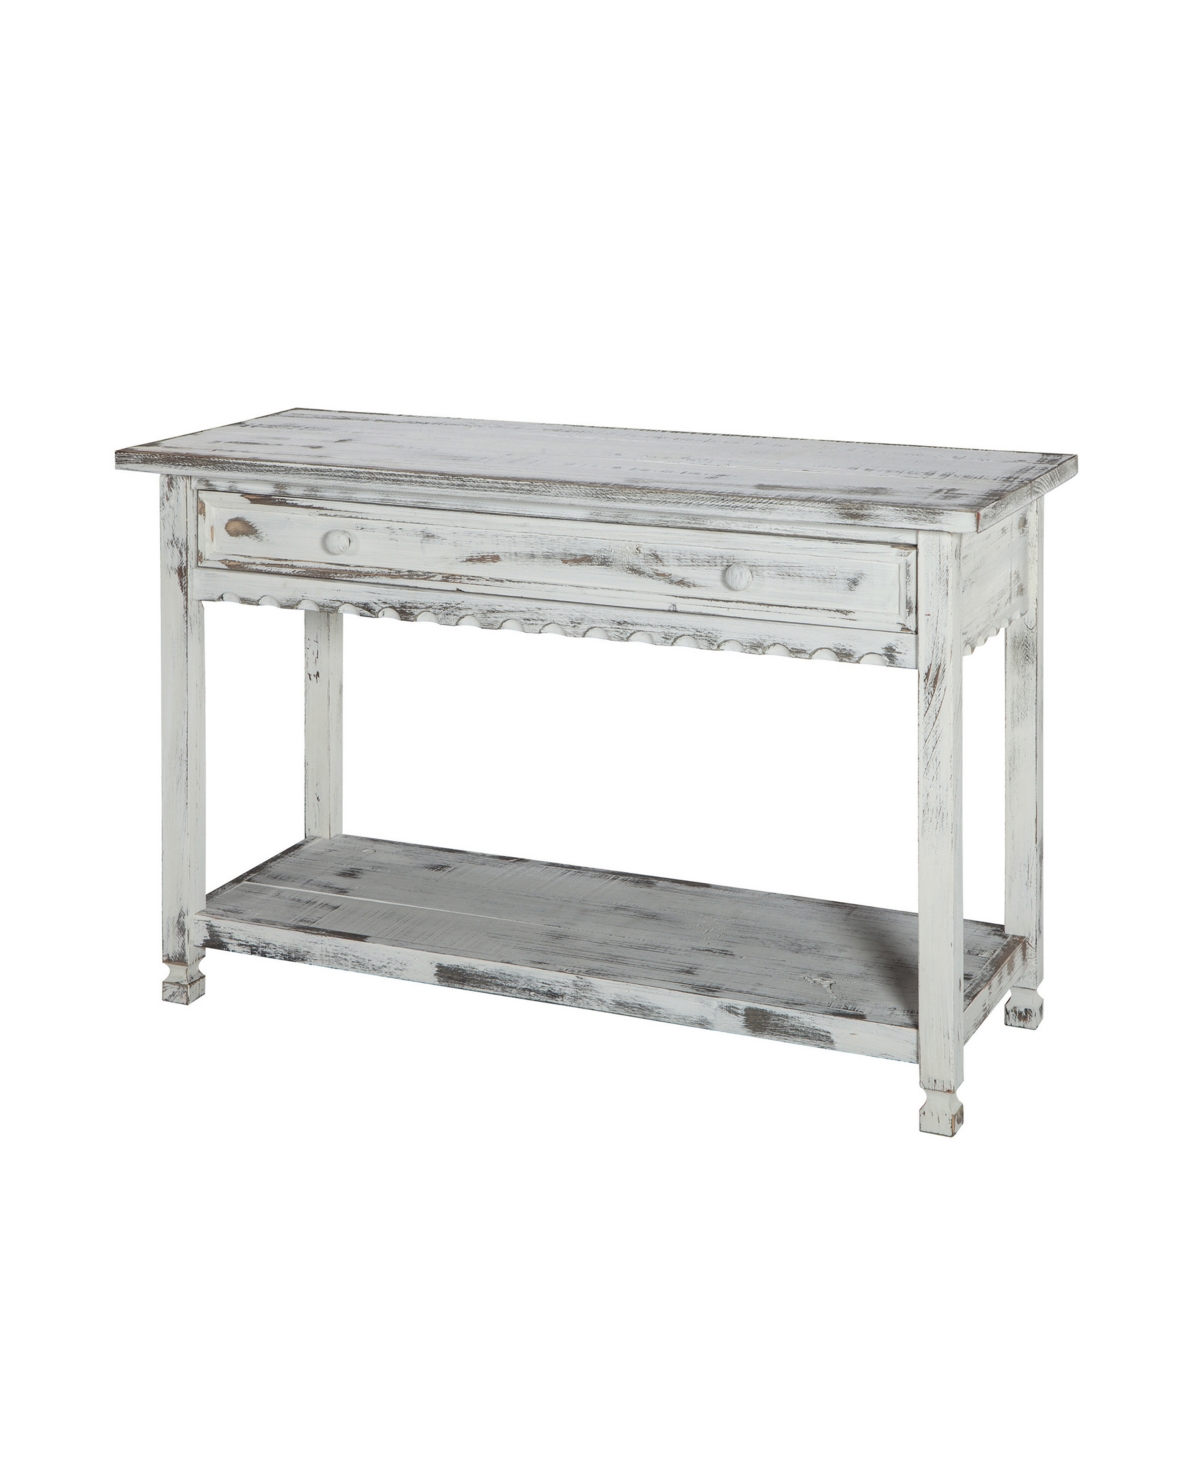 Alaterre Furniture Country Cottage Media/console Table